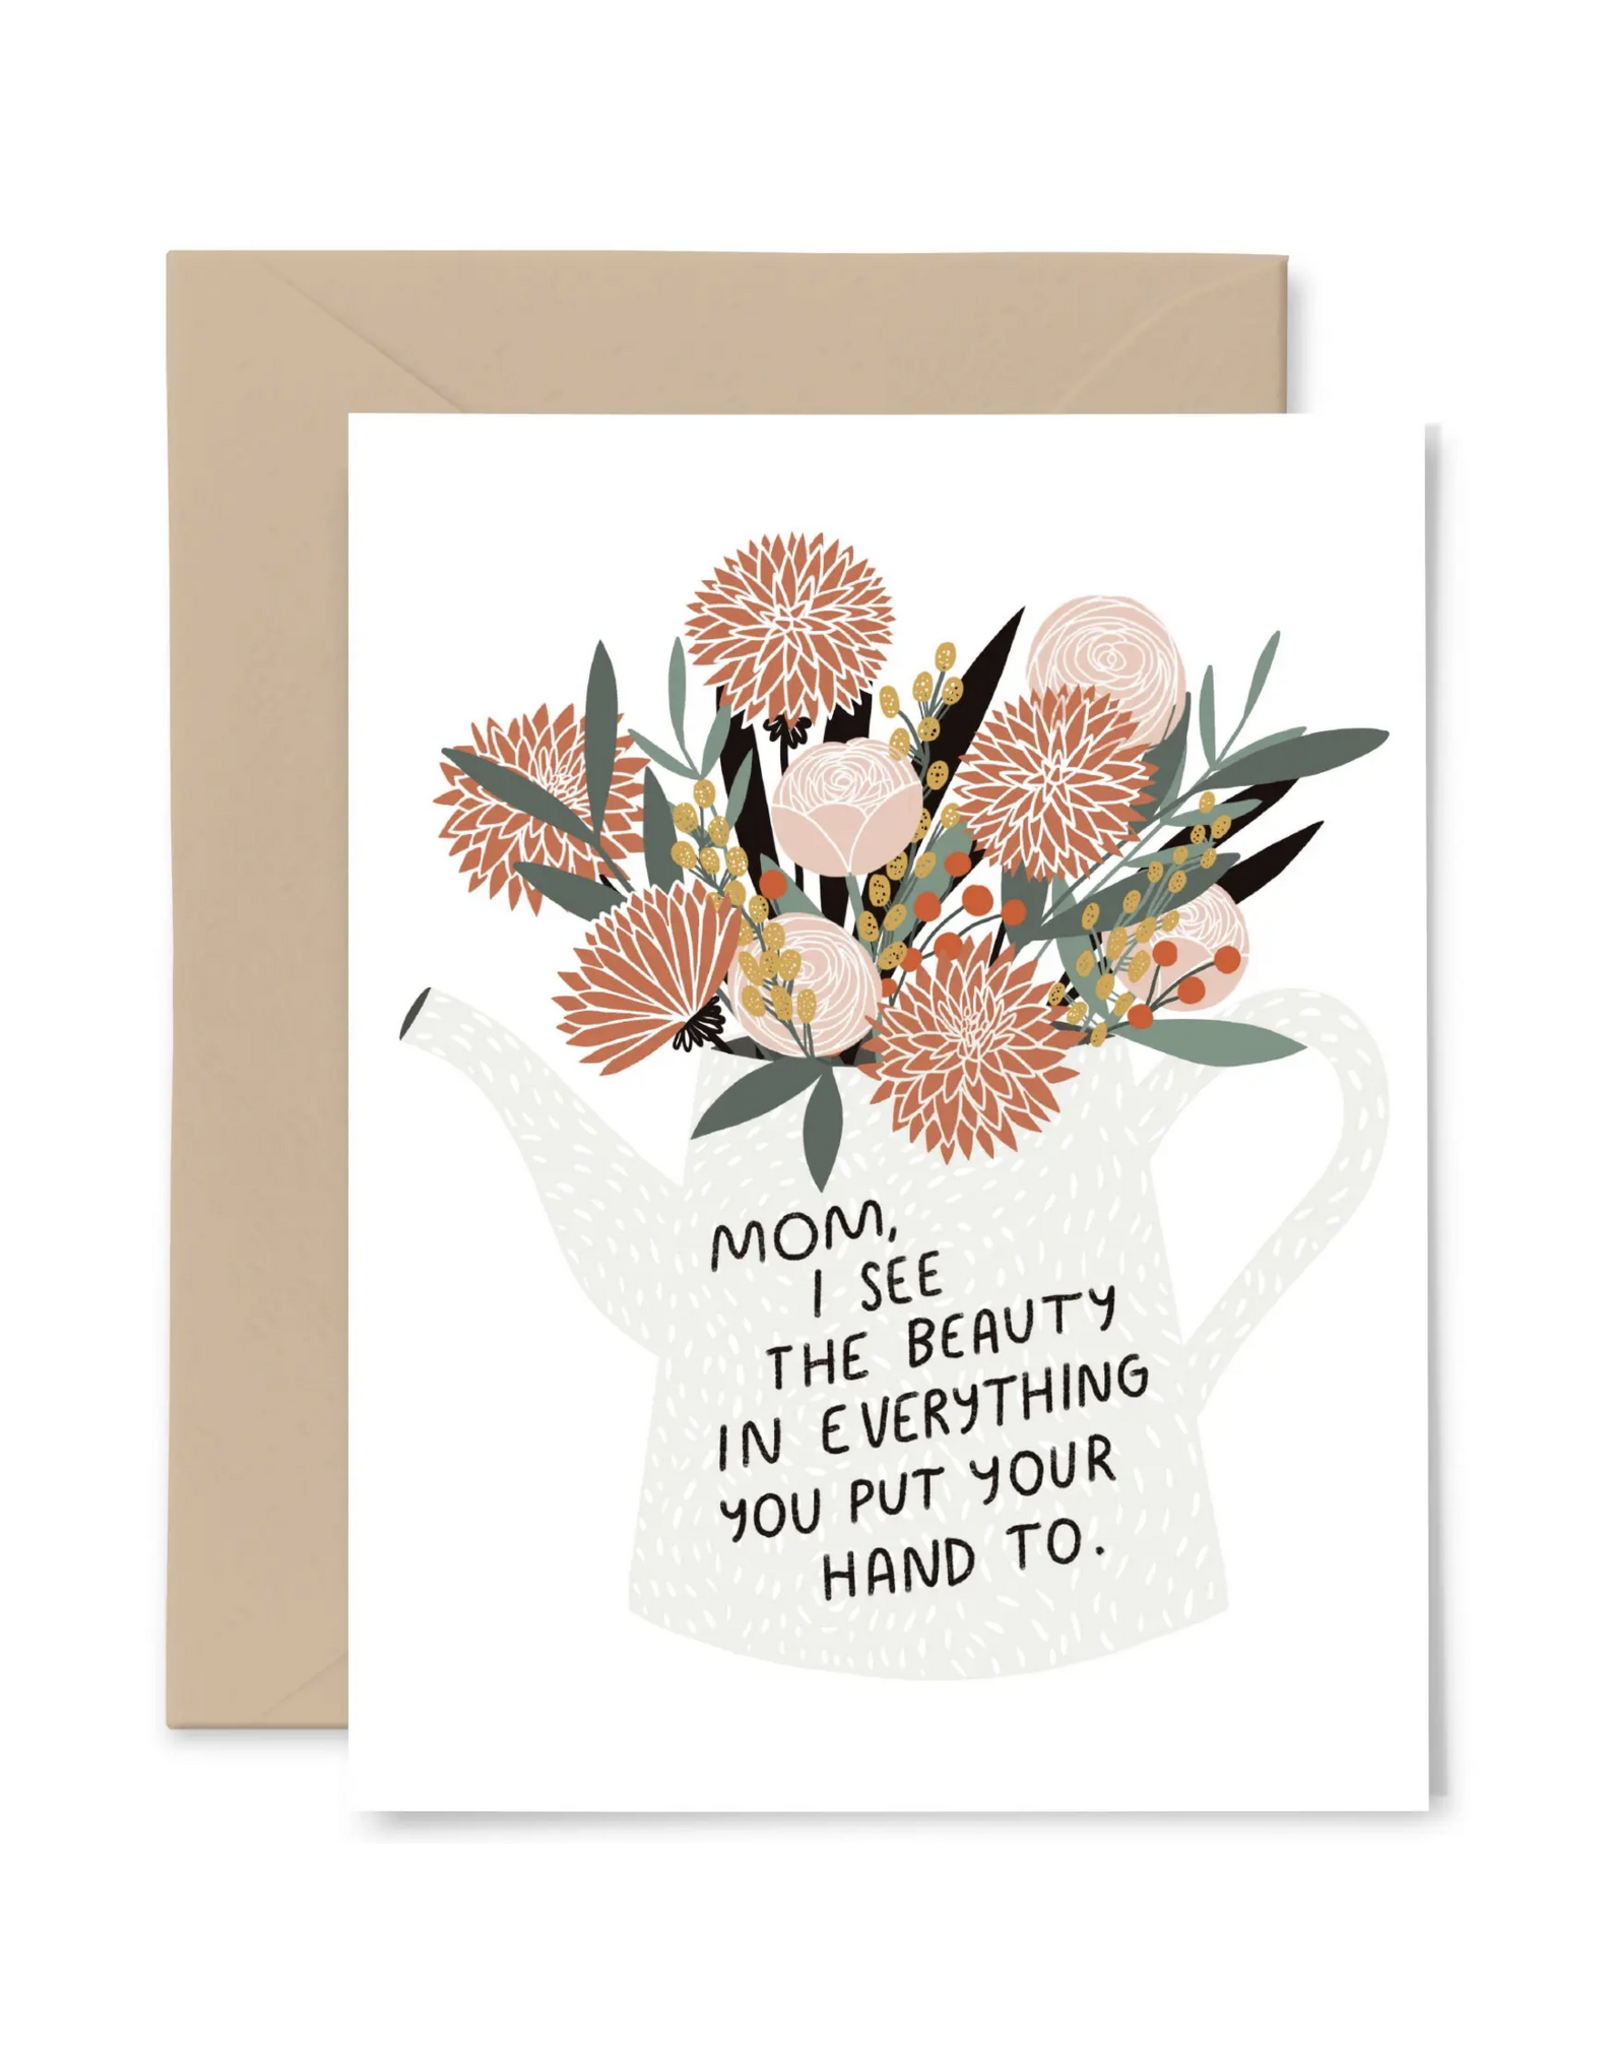 Mom, I See the Beauty... Greeting Card